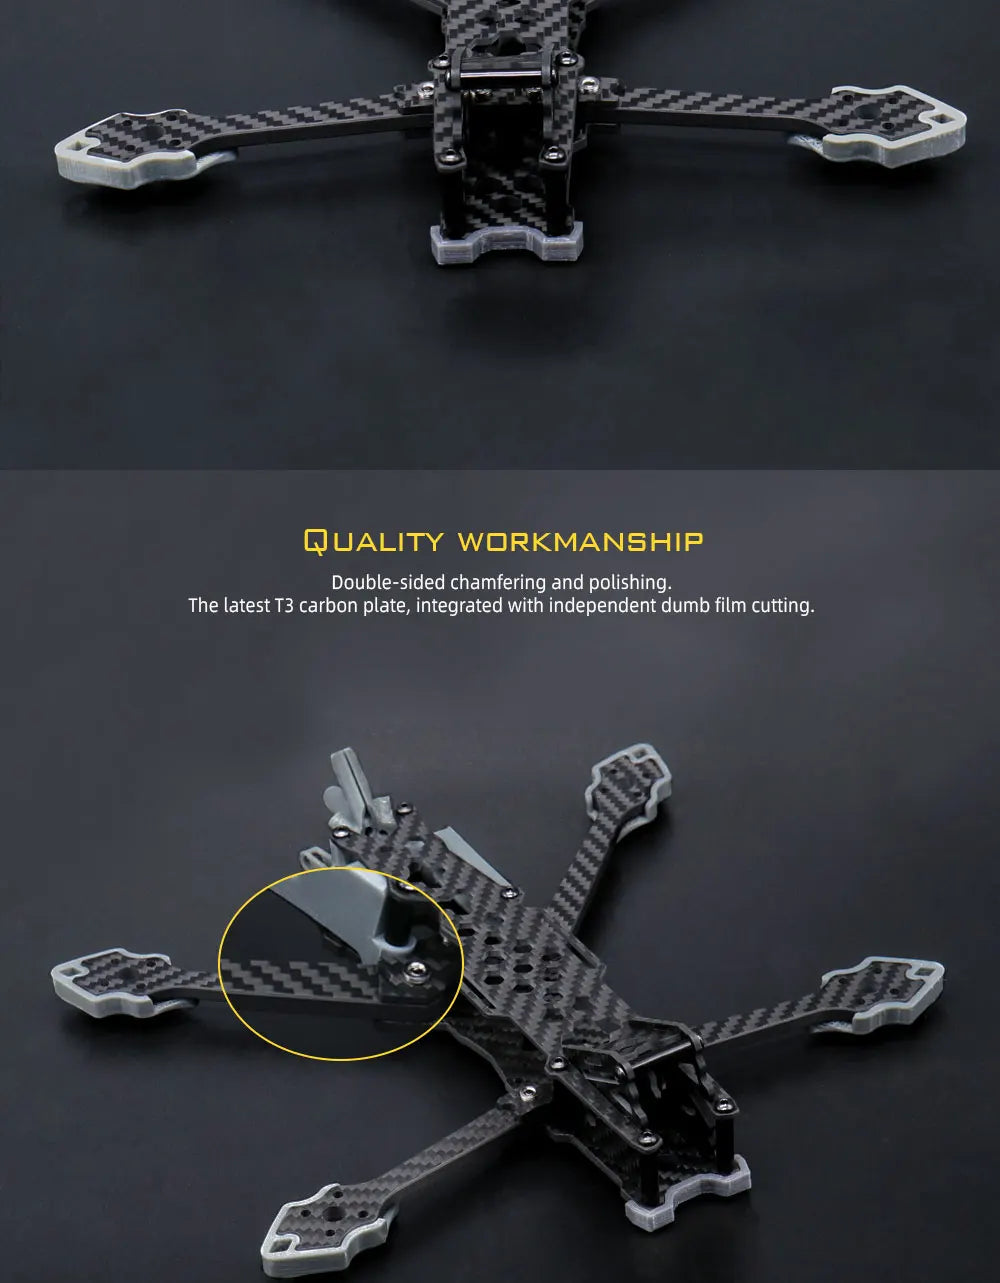 Avenger  5inch FPV frame Kit, QUALITY WORKMANSHIP Double-sided chamfering and polishing: